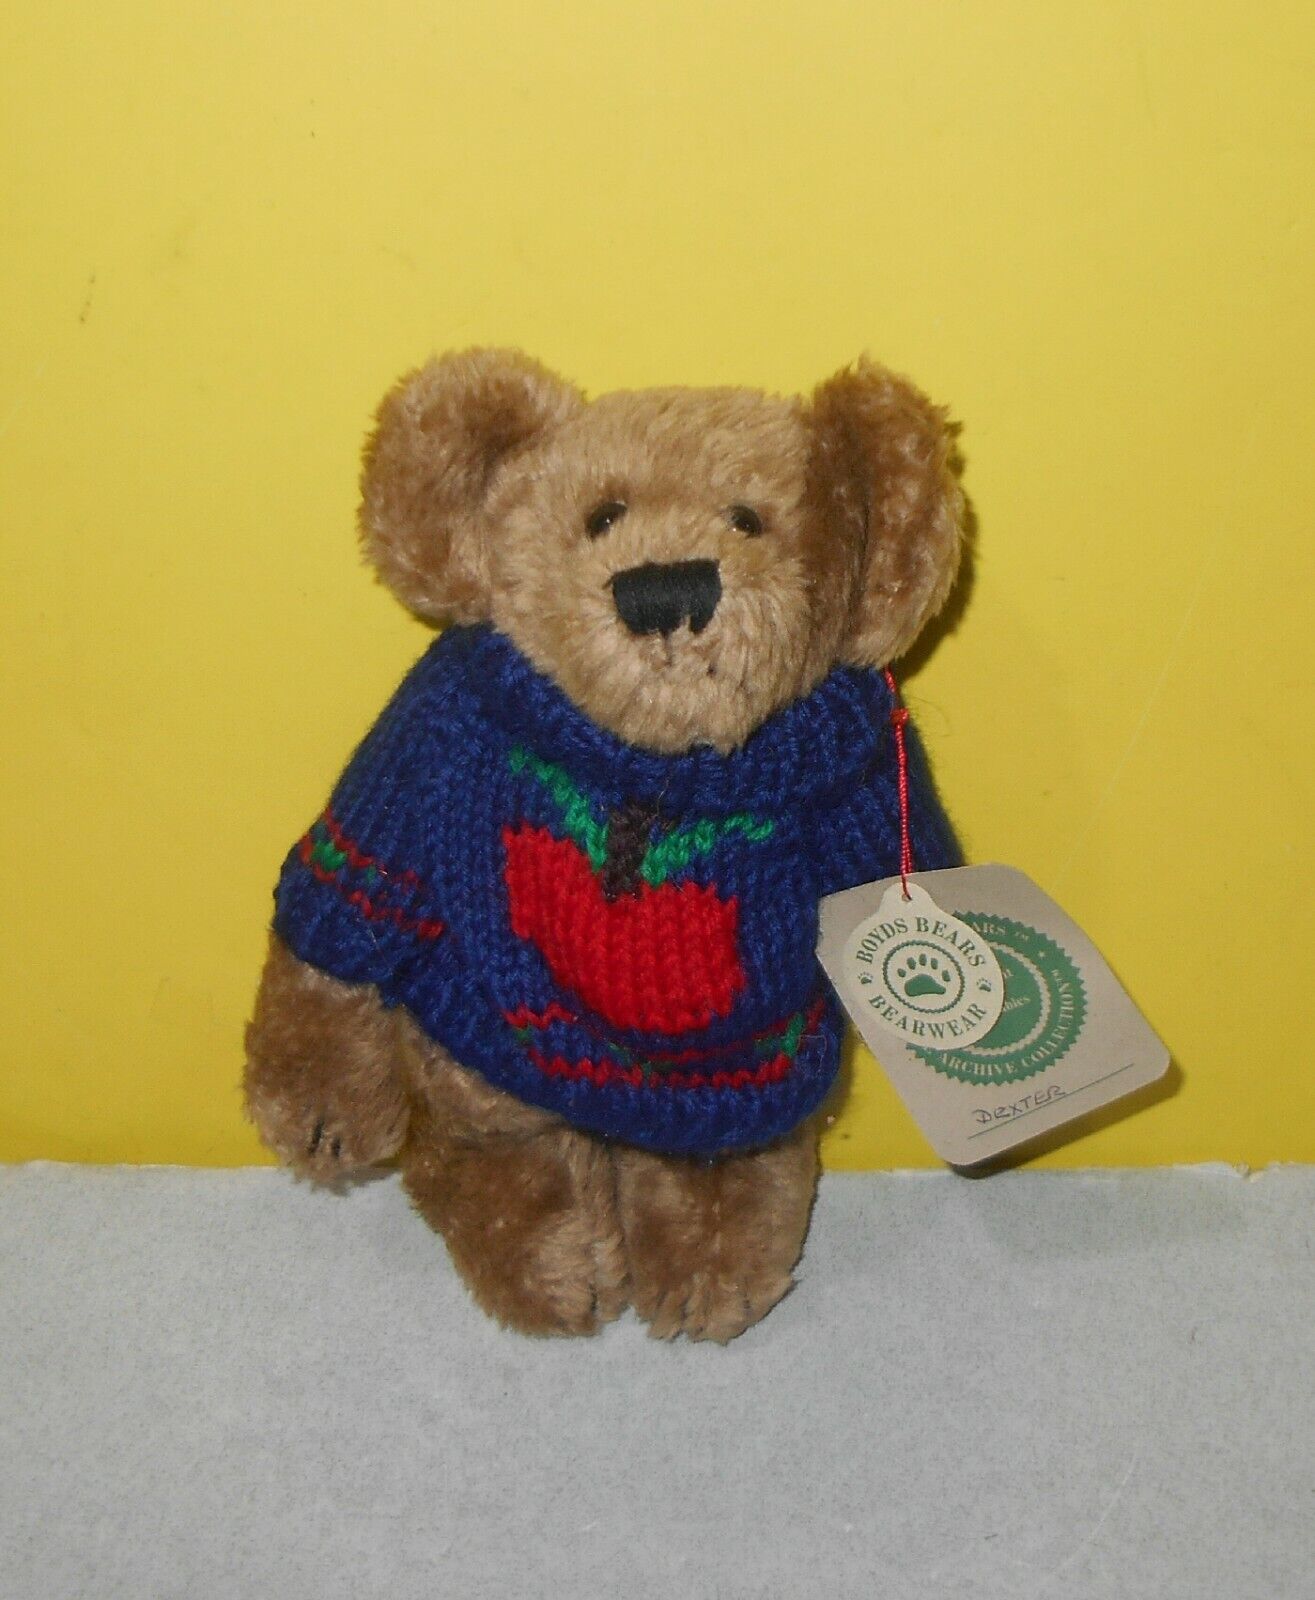 Boyds safety Bears Paxton B. Bean Jointed Reservation Blue w Appl plush Teddy Bear